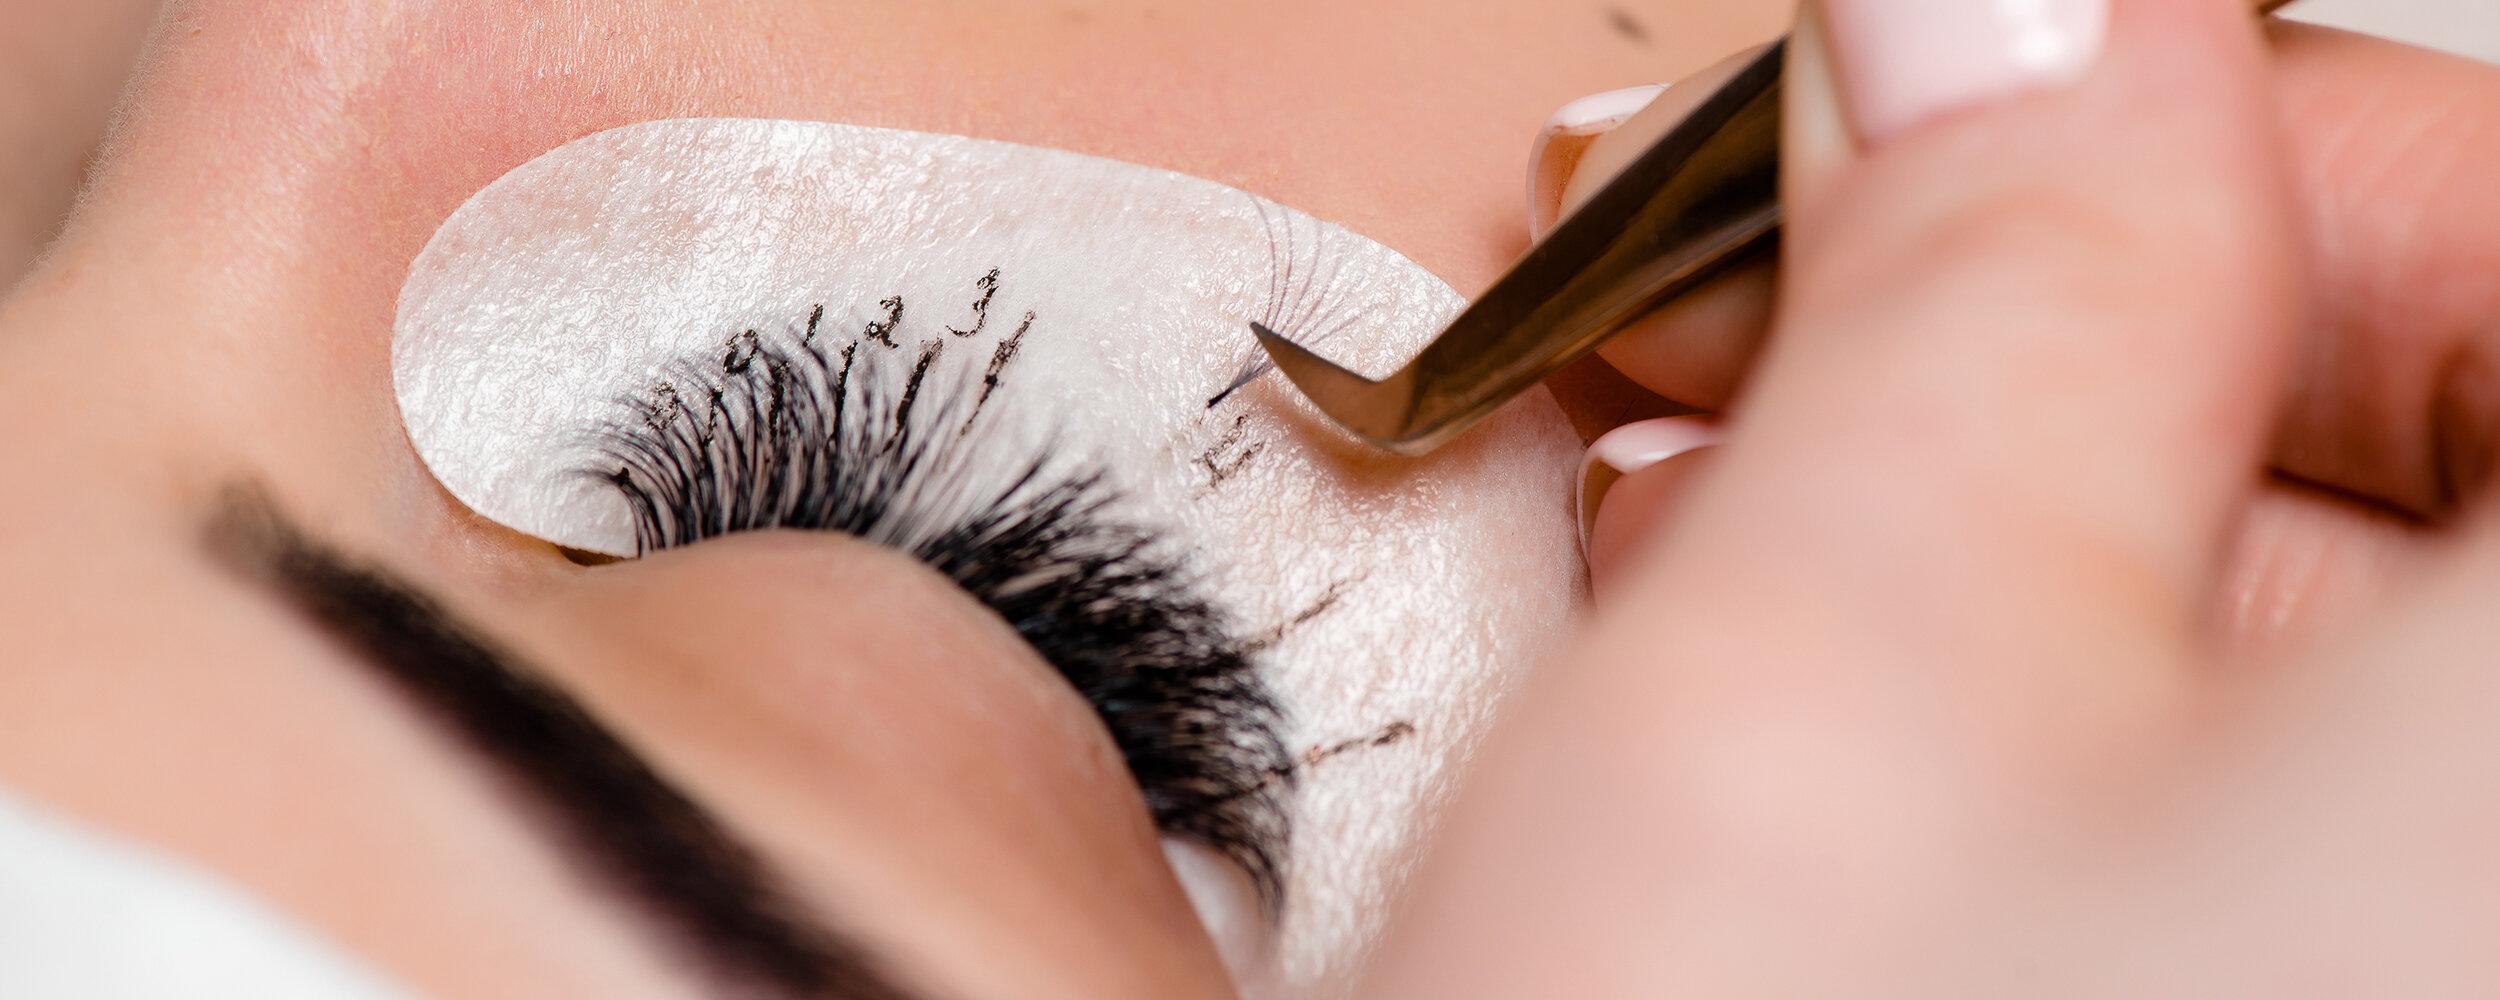 Vedette Beauty and Skincare Brooklyn Eyelash Extensions.jpg